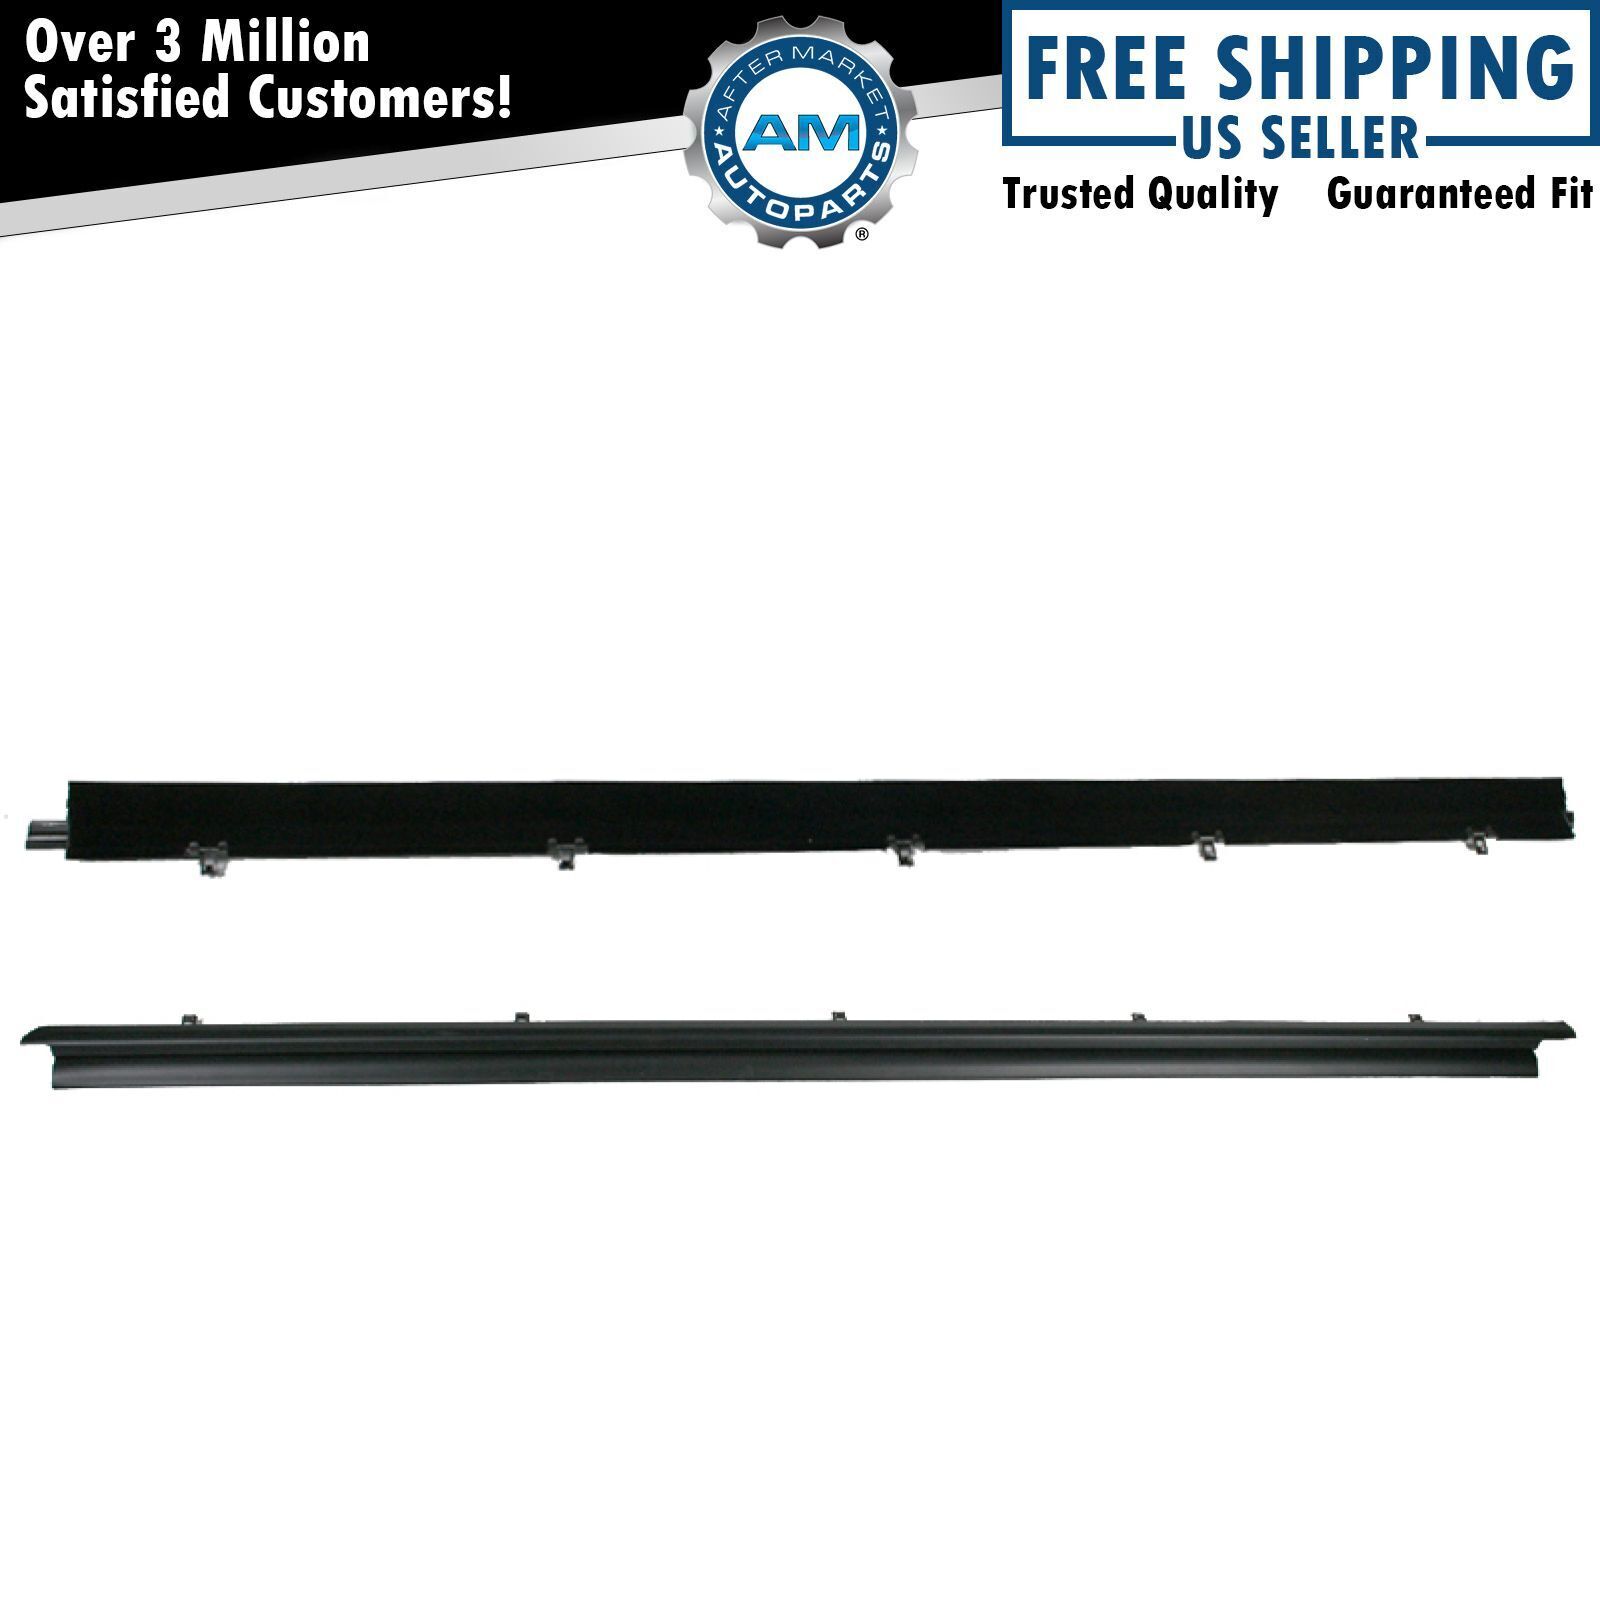 Outer Door Window Sweep Kit 2 Piece Pair for Chevy GMC Jimmy S10 S15 Pickup